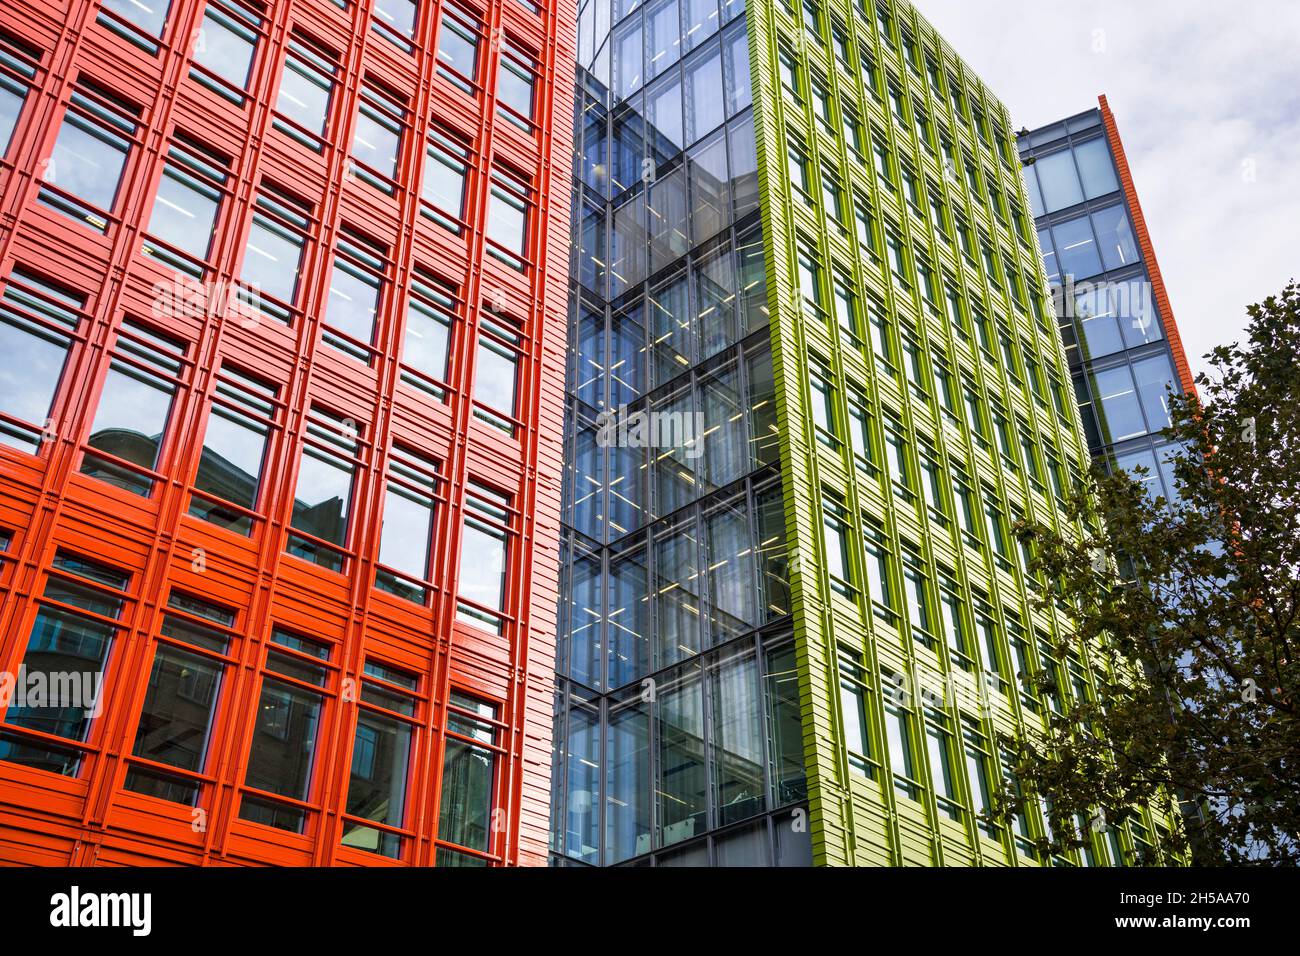 Renzo Piano Central St Giles building, modern business offices near saint giles in the fields, church, St Giles,london,england,uk Stock Photo